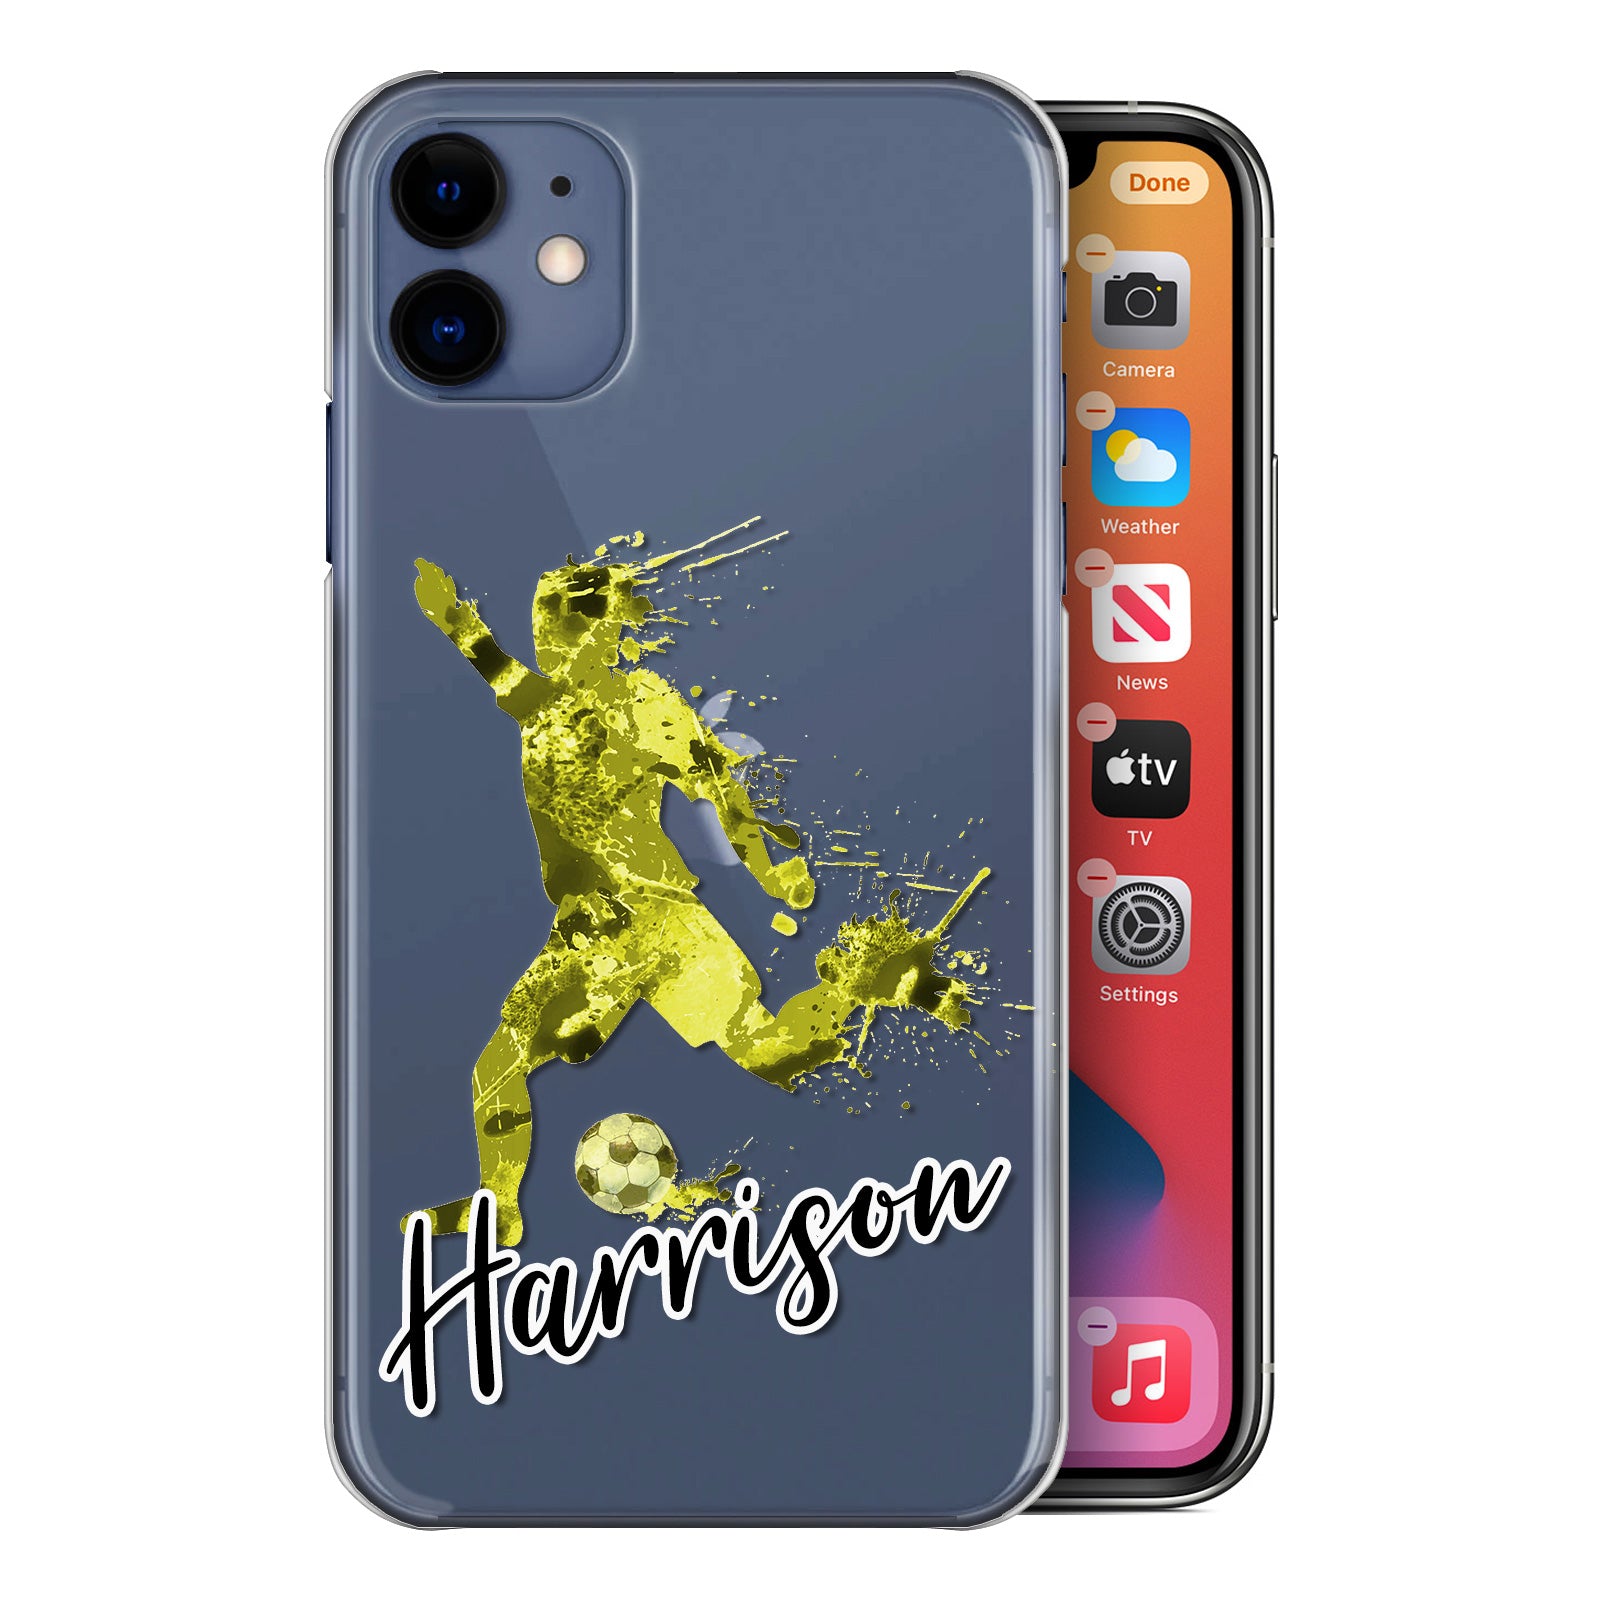 Personalised Huawei Phone Hard Case - Zesty Yellow Football Star with White Outlined Text